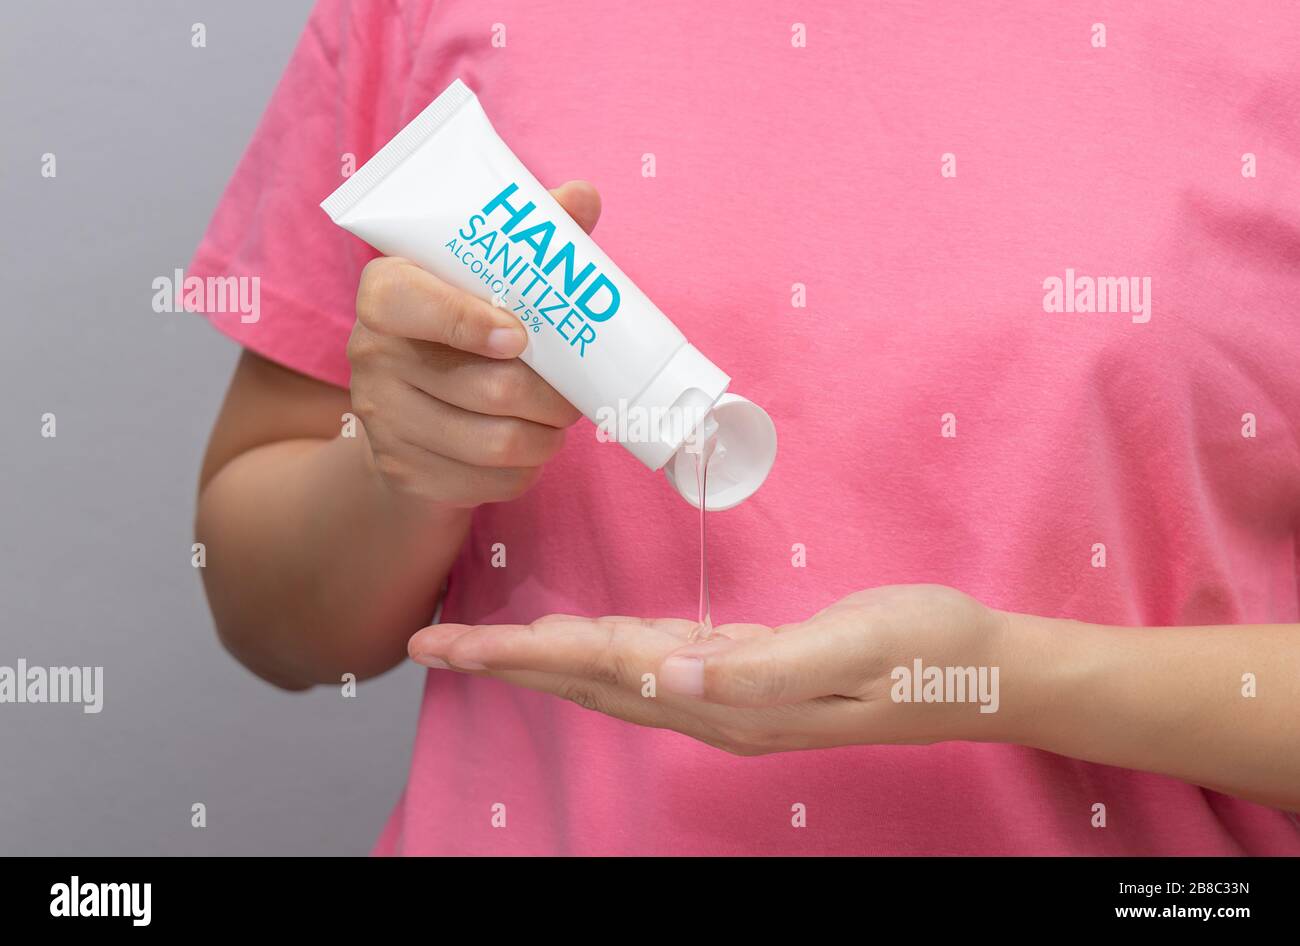 personal hygiene. people washing hand by hand sanitizer alcohol gel for cleaning and disinfection, prevention of spreading of germs during infections Stock Photo